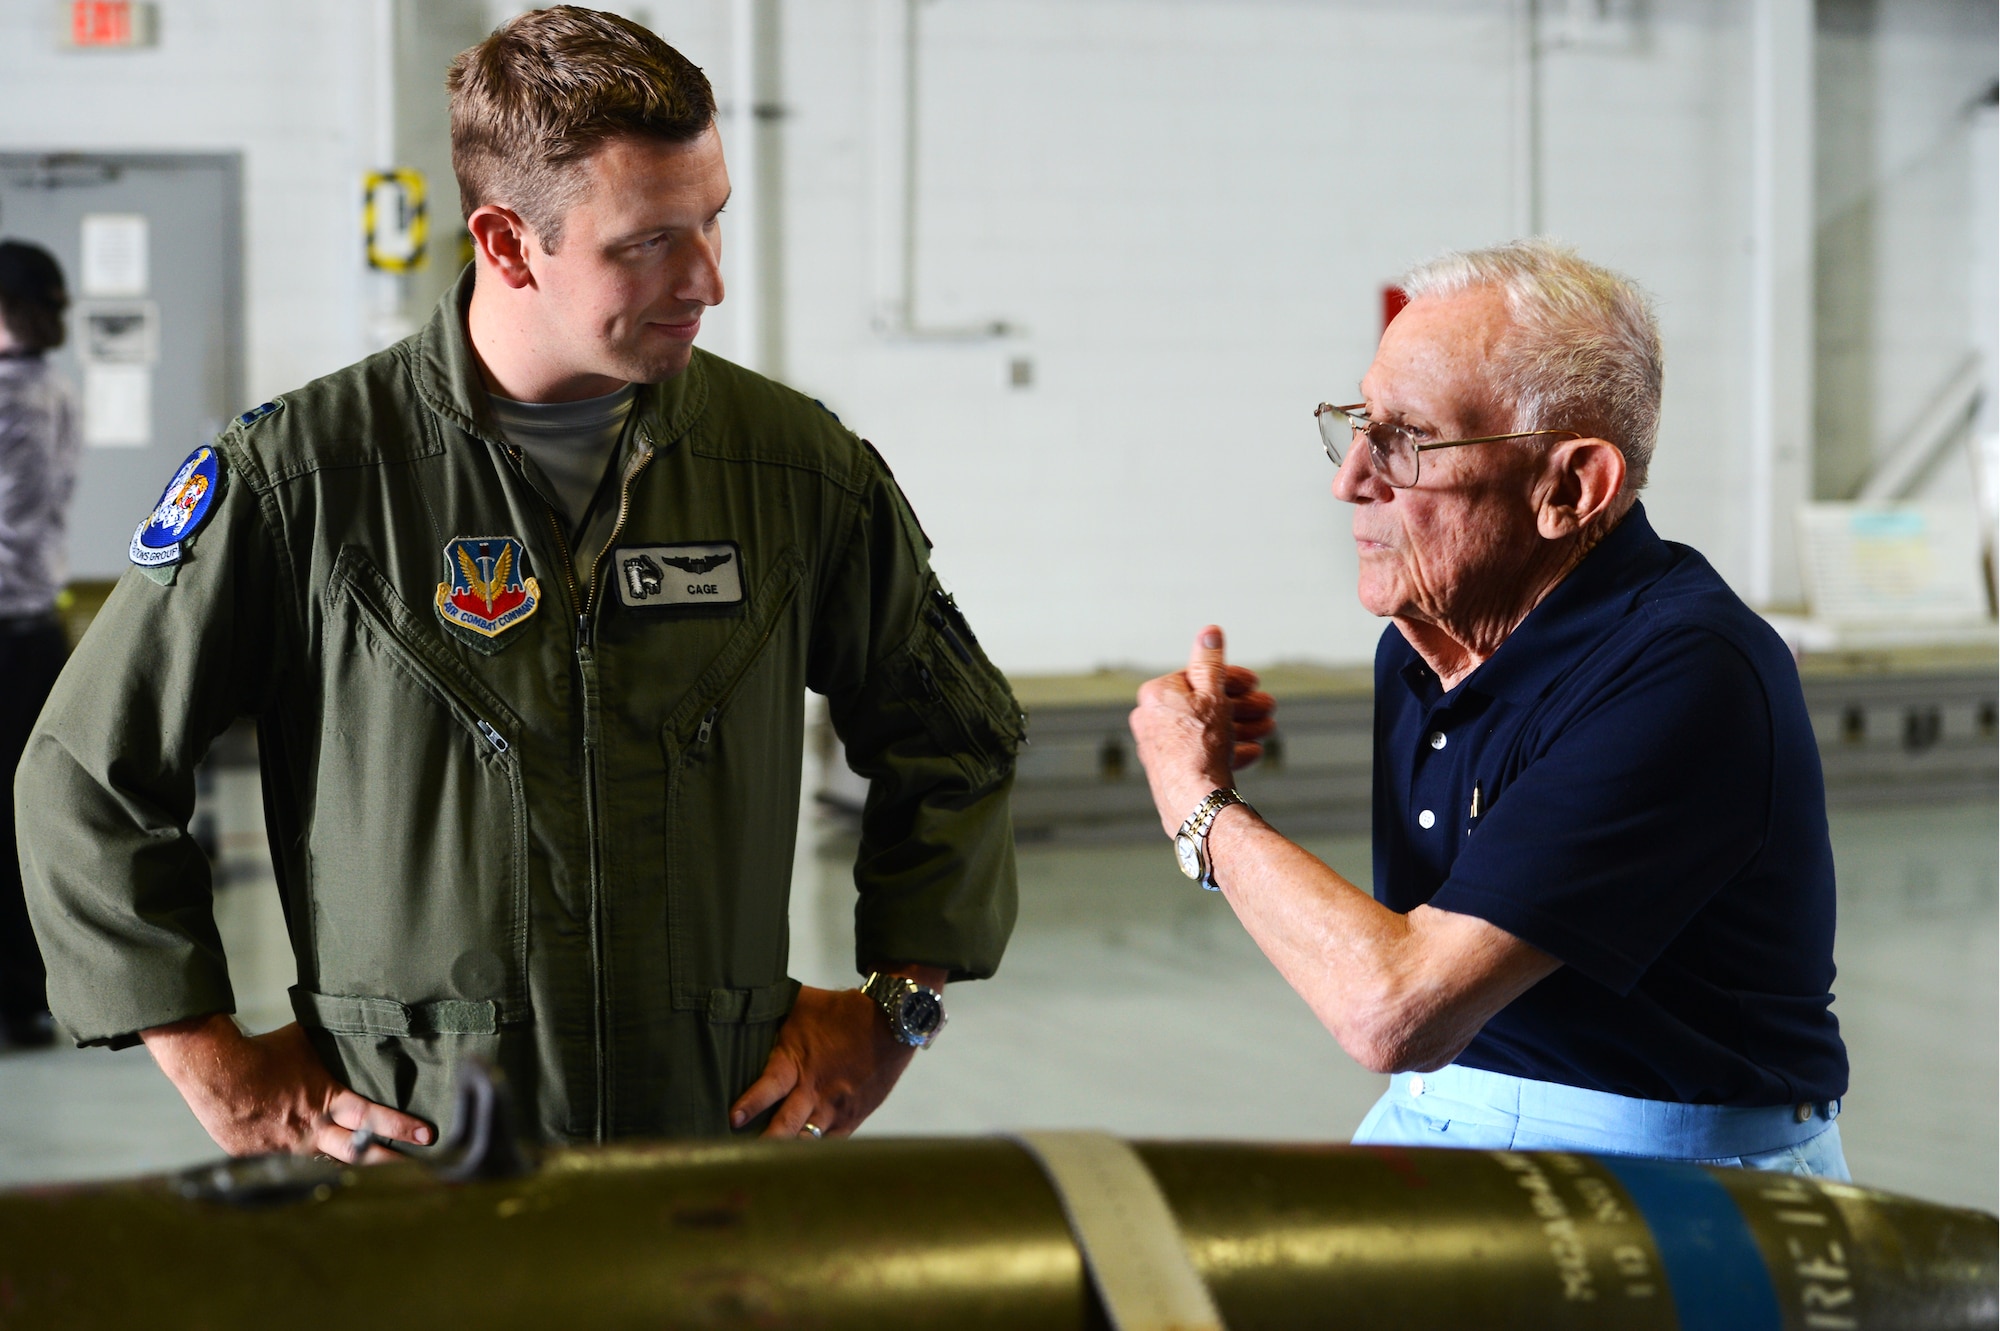 A retired U.S. Air Force Wild Weasel speaks to a current Wild Weasel fighter pilot at Shaw Air Force Base, S.C., June 5, 2015. The Wild Weasels toured the 20th Maintenance Group’s weapons standardization and evaluation hangar to learn about the munitions the 20th Fighter Wing employs in combat. (U.S. Air Force photo by Senior Airman Jonathan Bass/Released)